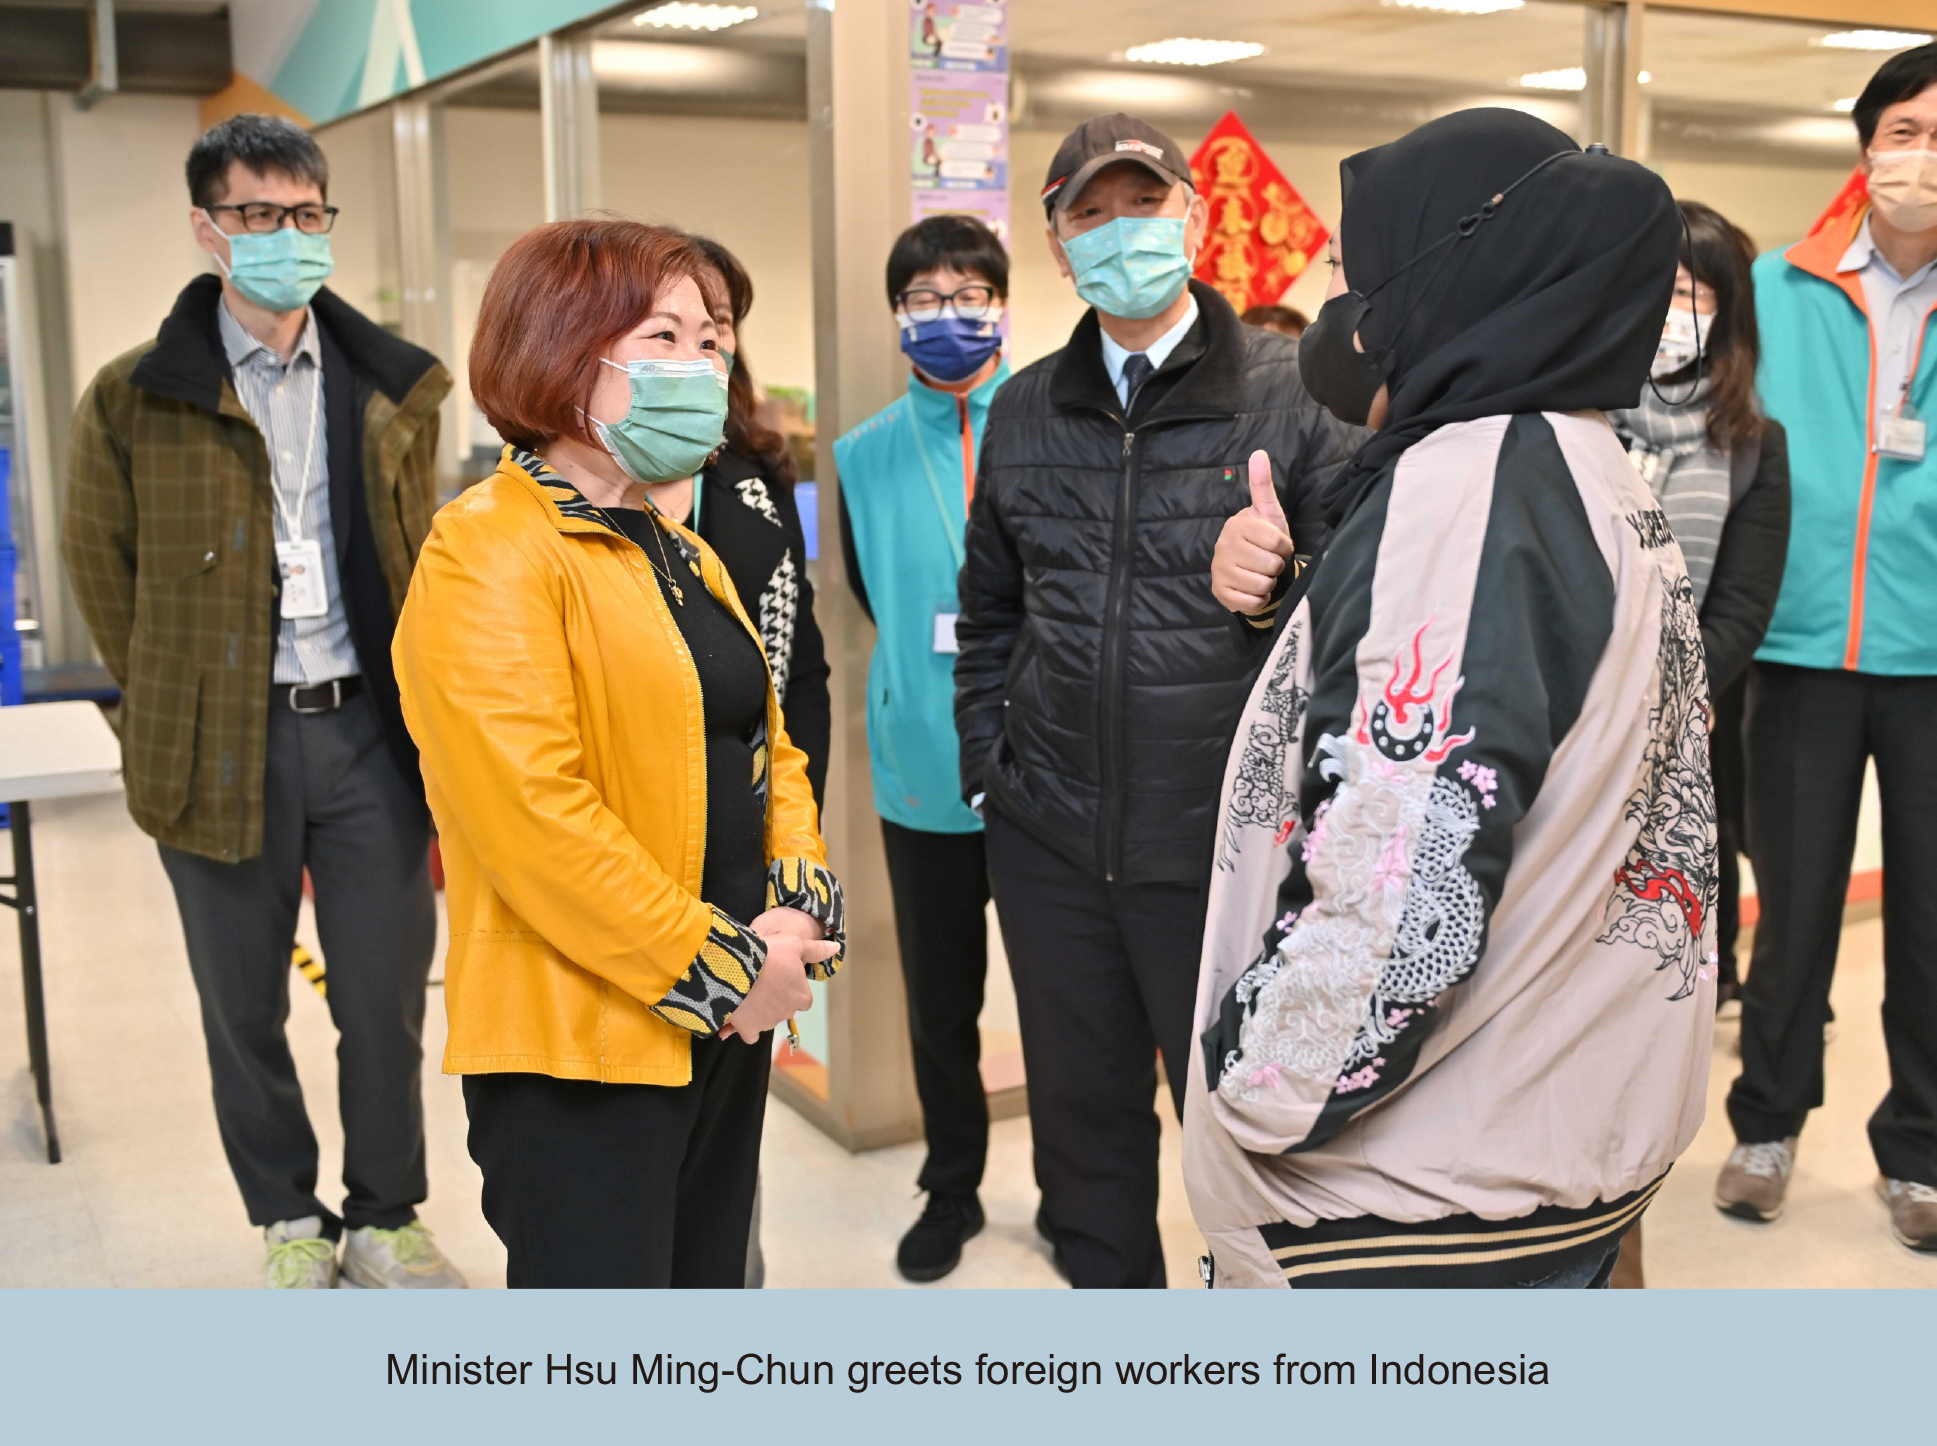 Minister Hsu Ming-Chun of the MOL Visits the One-Stop Service Center to Understand the Entry Orientation Status of Household Foreign Workers